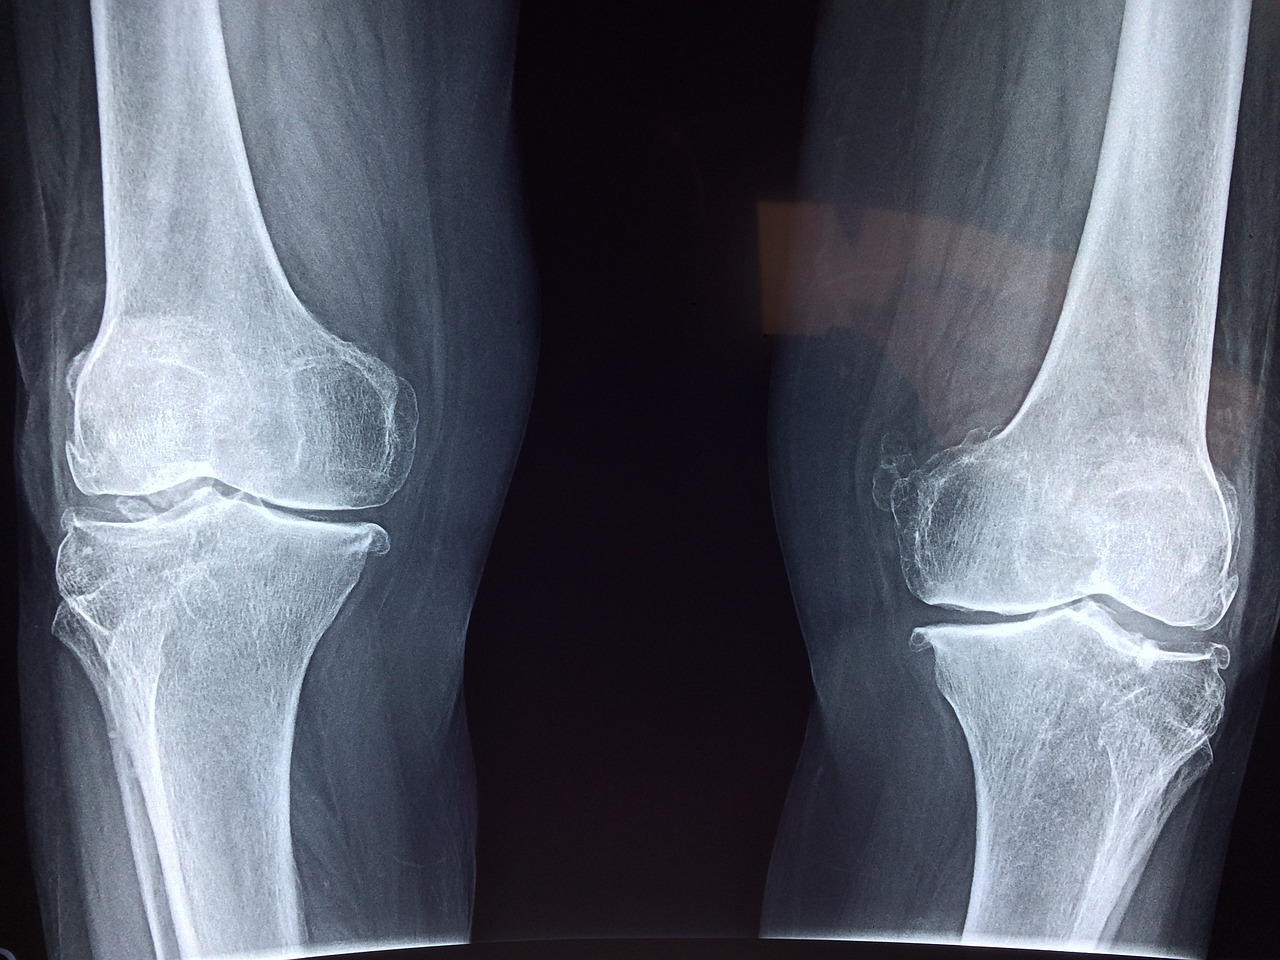 x-ray of two knees.